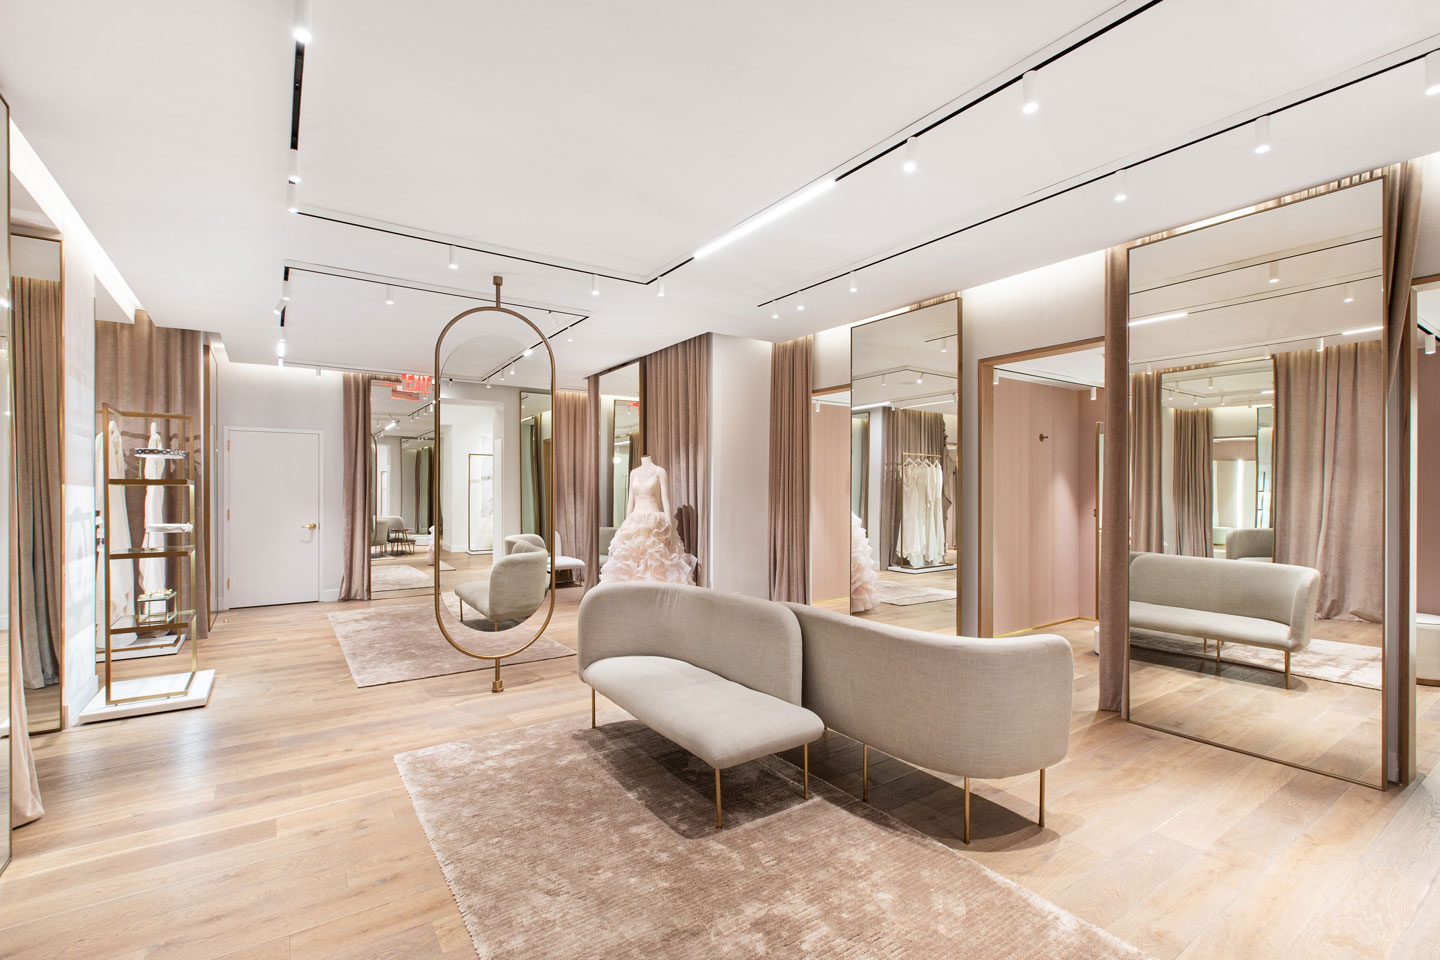 Commercial retail interiors of Pronovias showroom in New York